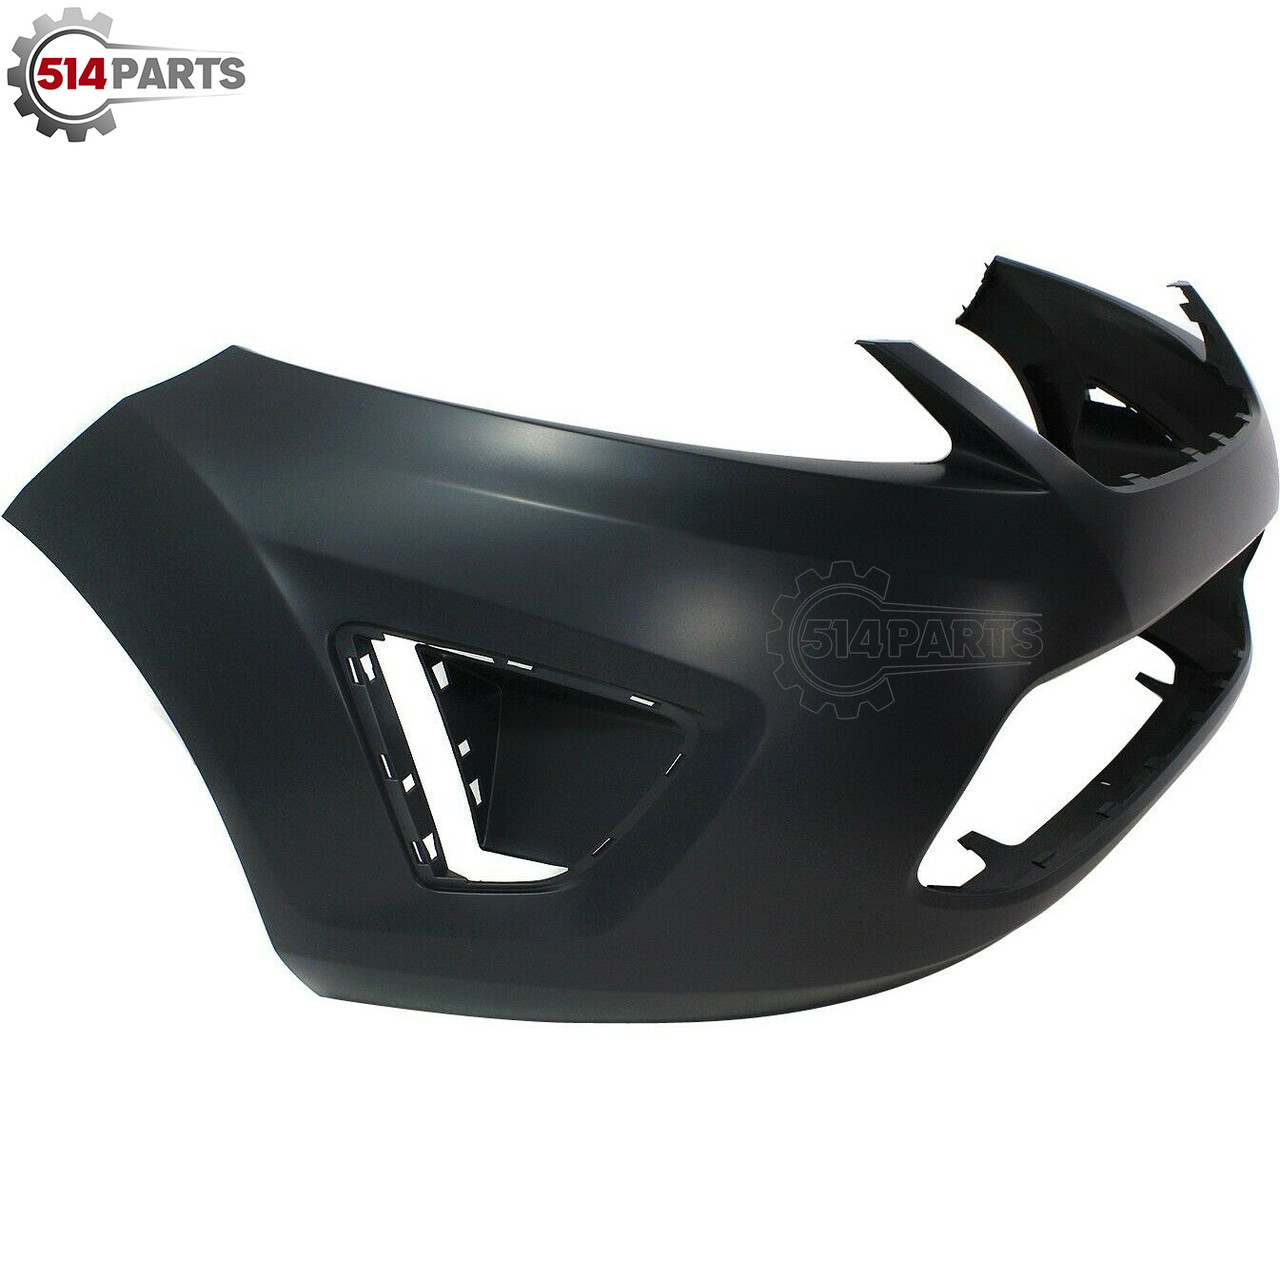 2011 - 2013 FORD FIESTA SEDAN and HATCHBACK FRONT BUMPER COVER - PARE-CHOCS AVANT